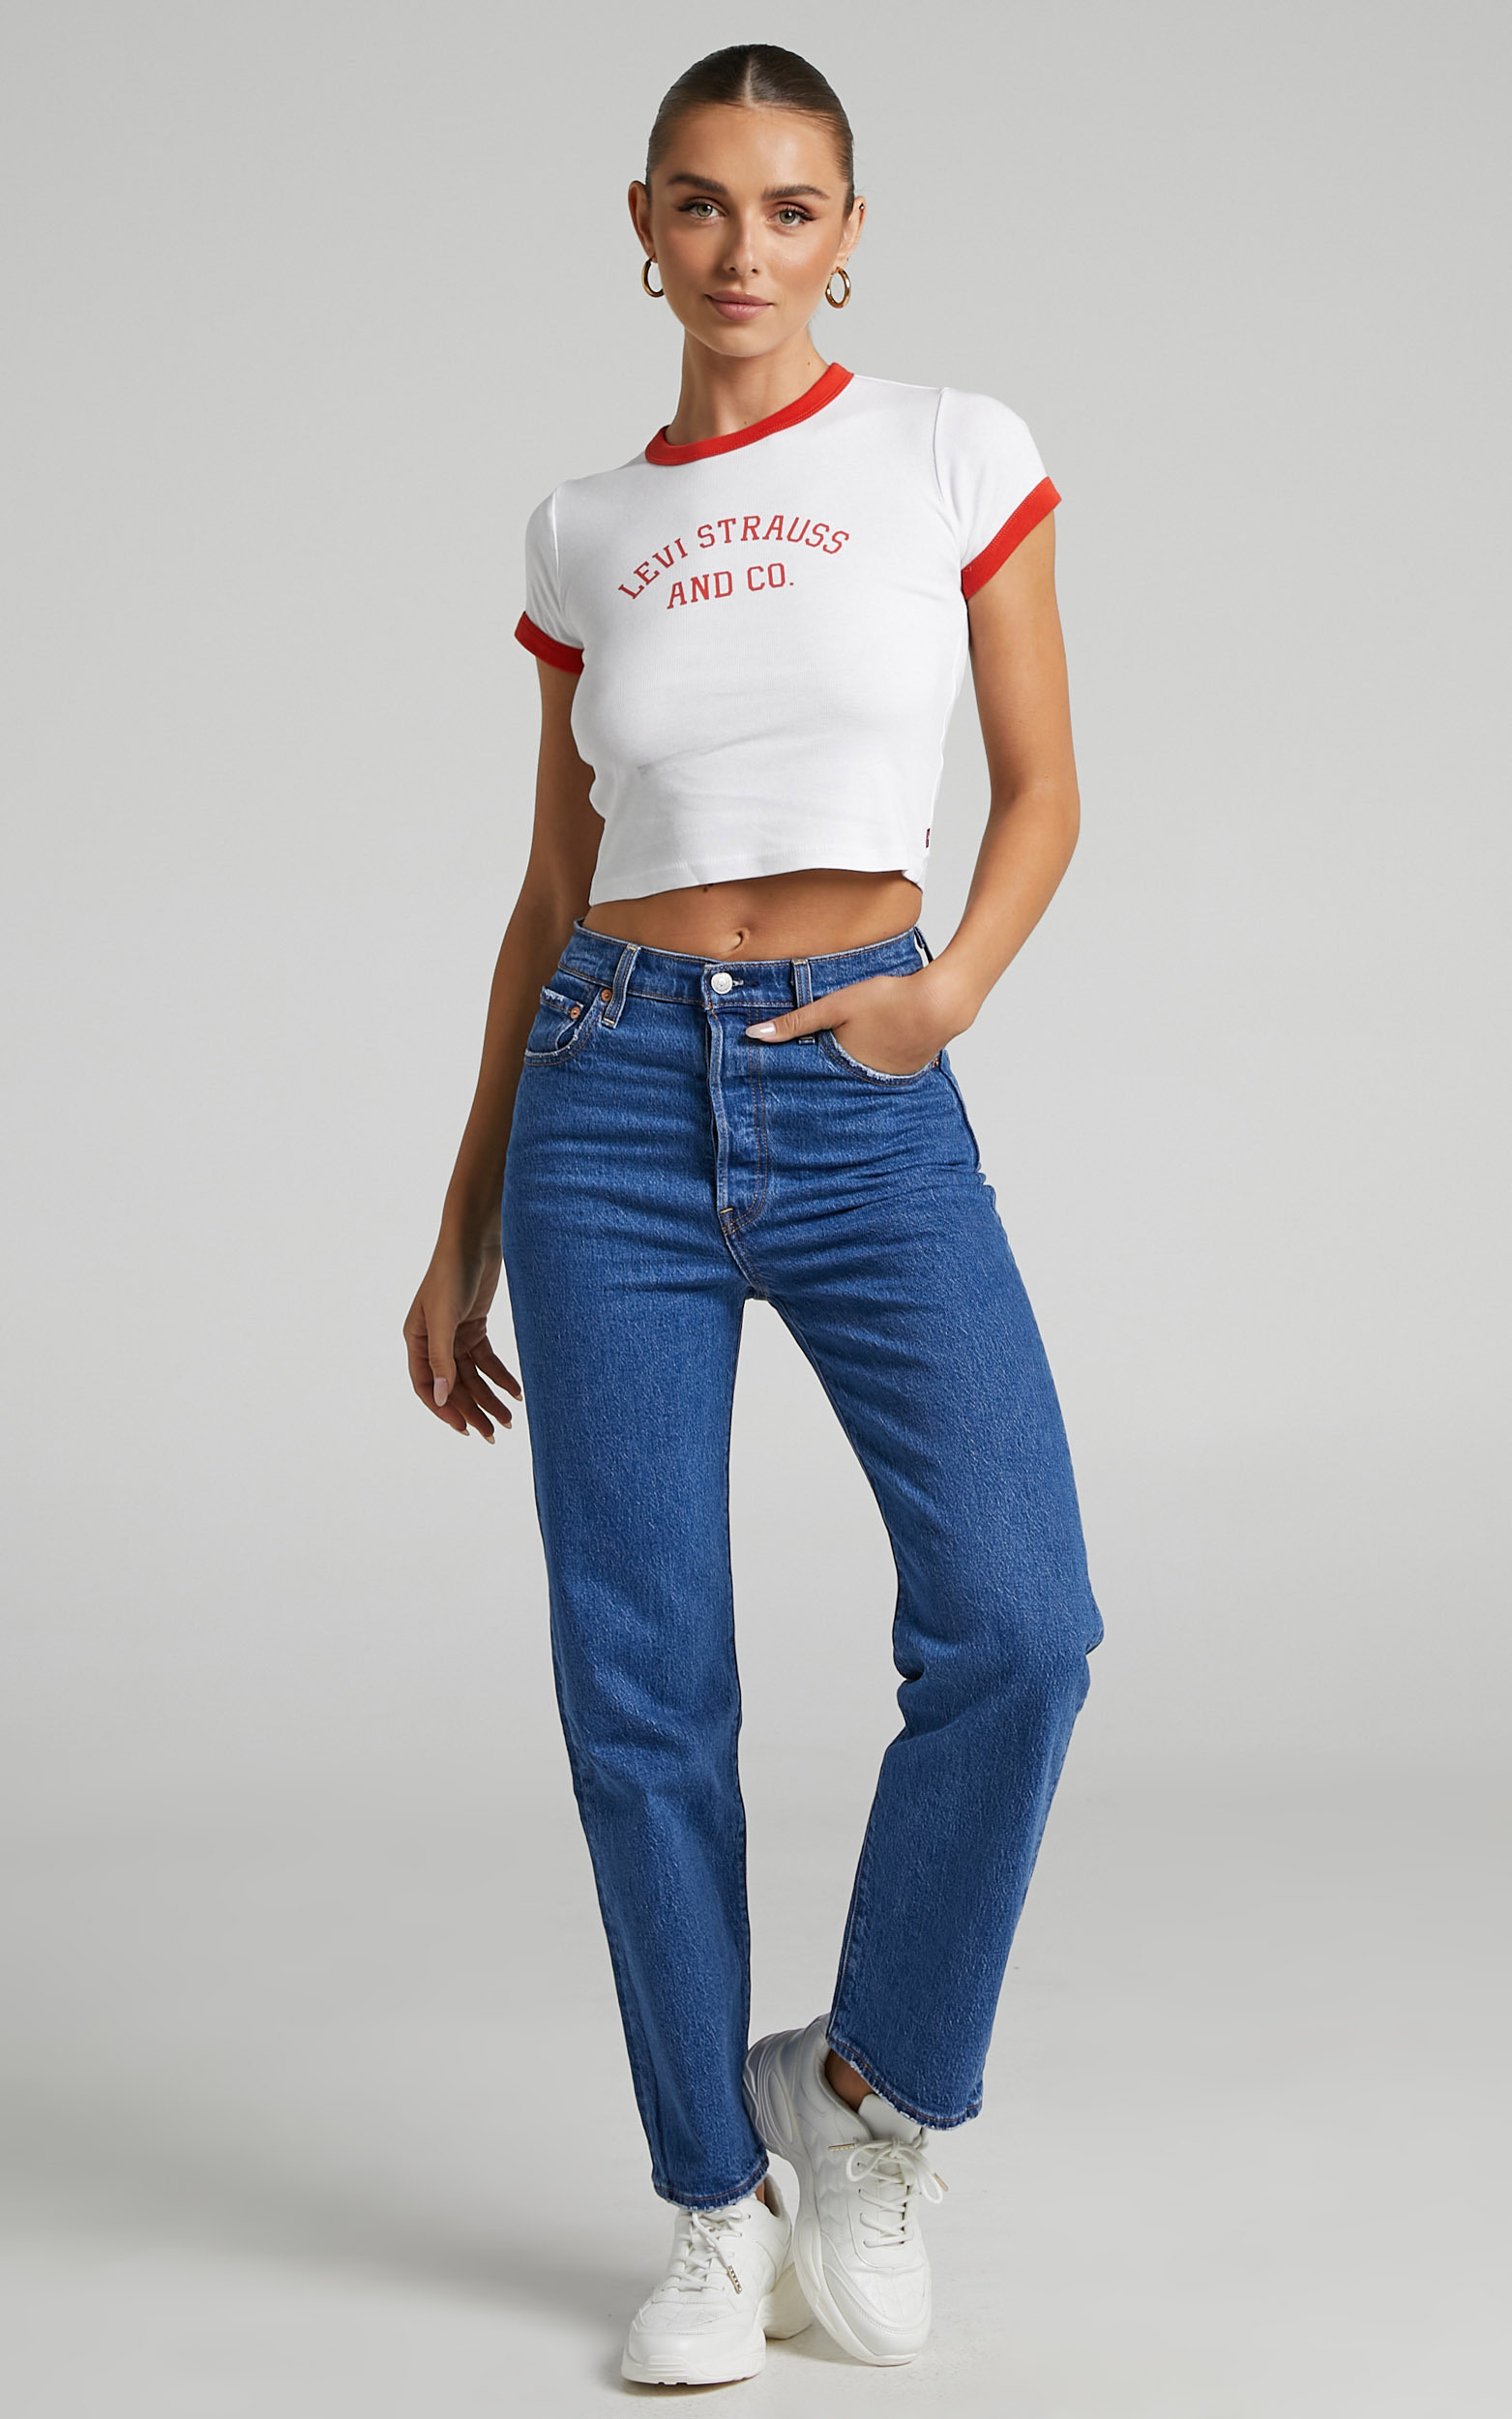 Levi's - Ribcage Straight Ankle Jean in JAZZ JIVE TOGETHER - 06, BLU1, hi-res image number null